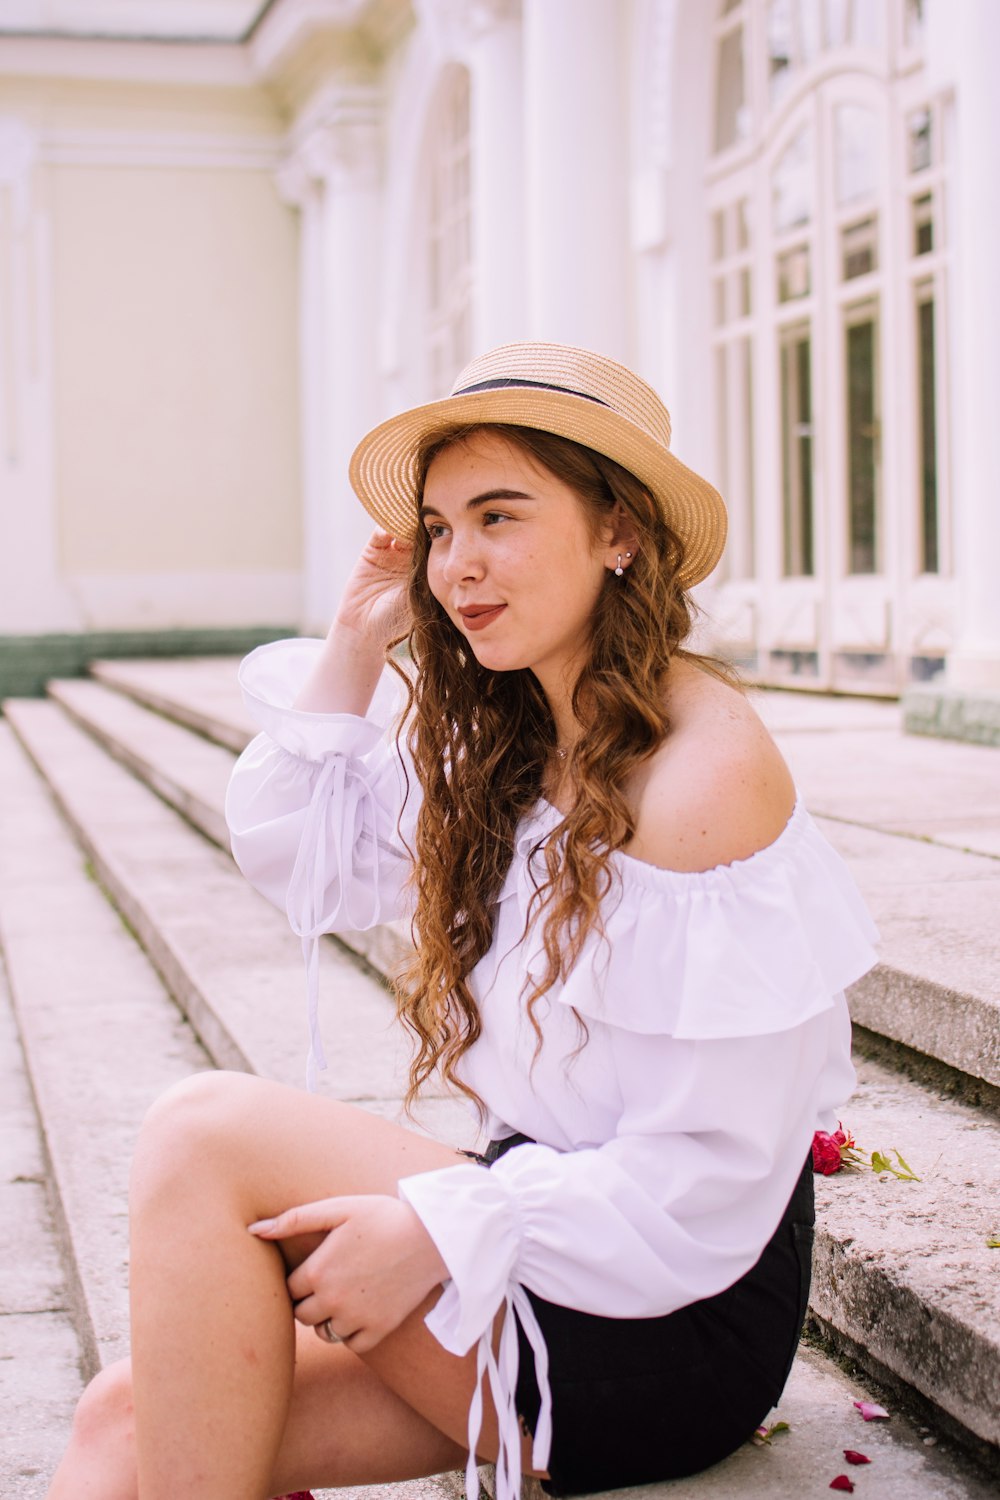 woman in white off shoulder dress wearing brown hat sitting on concrete floor during daytime